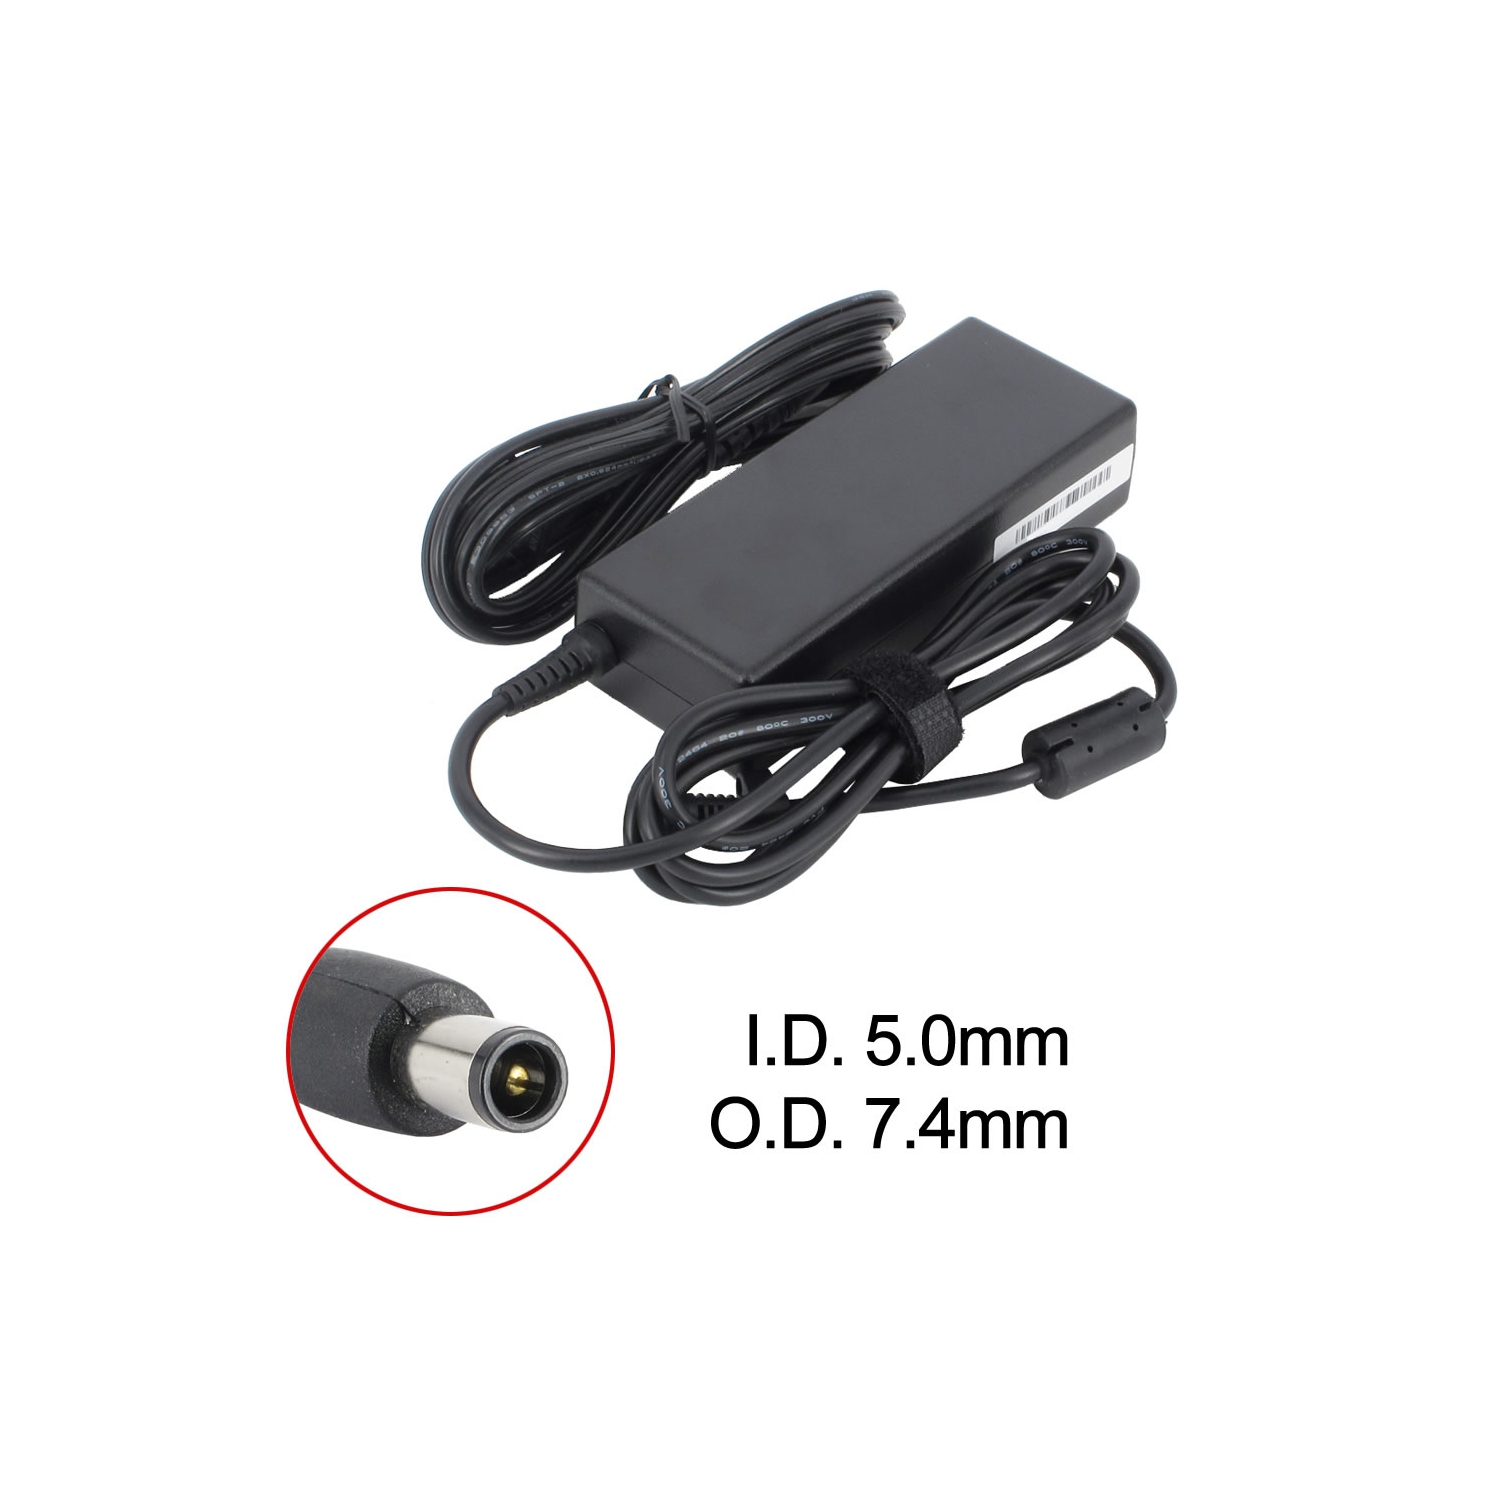 New Laptop AC Adapter for Dell Inspiron 1764, 0DF263, 310-7693, 310-9757, 330-2964, D094H, FA90PM138, NN236, UC473